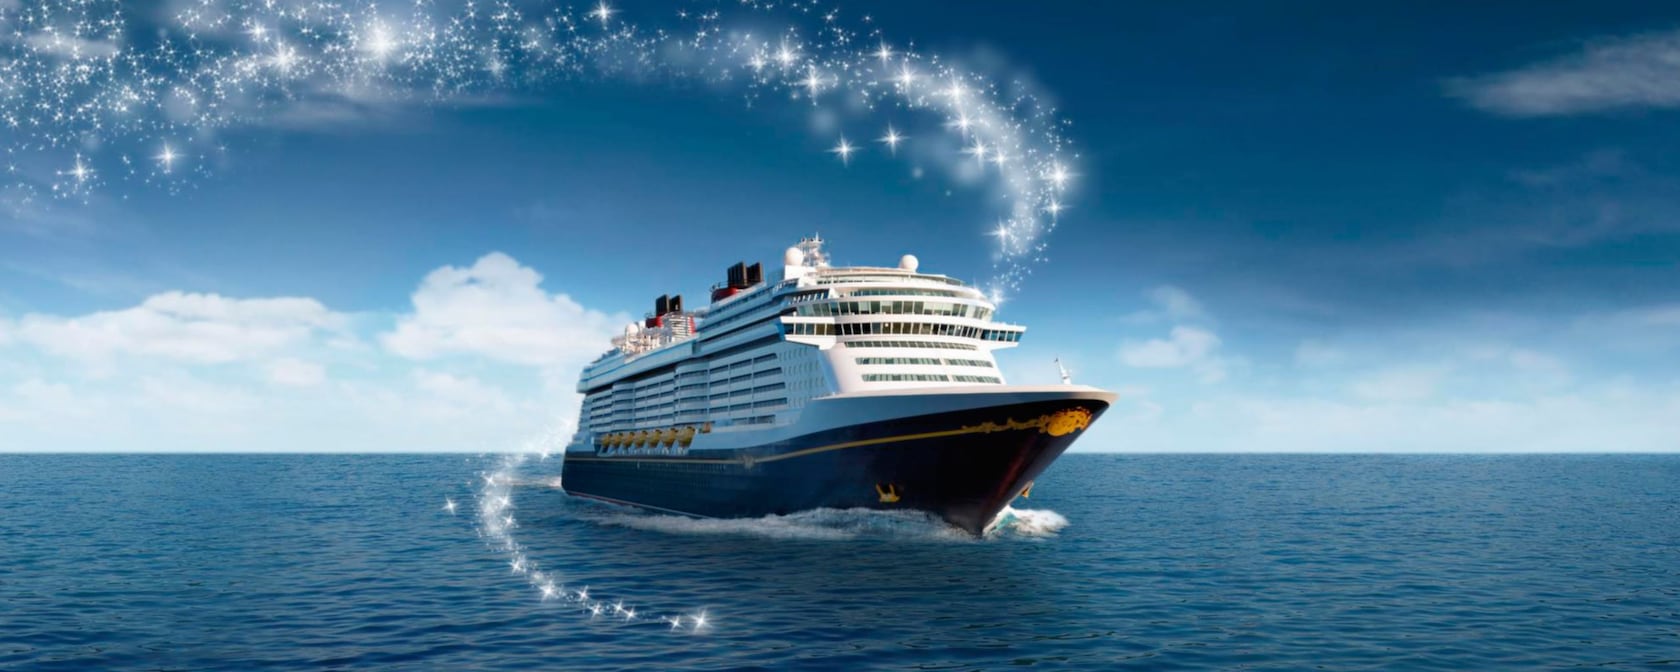 The Disney Wish, the newest of the Disney Cruise Line ships, sails along amid plumes of pixie dust